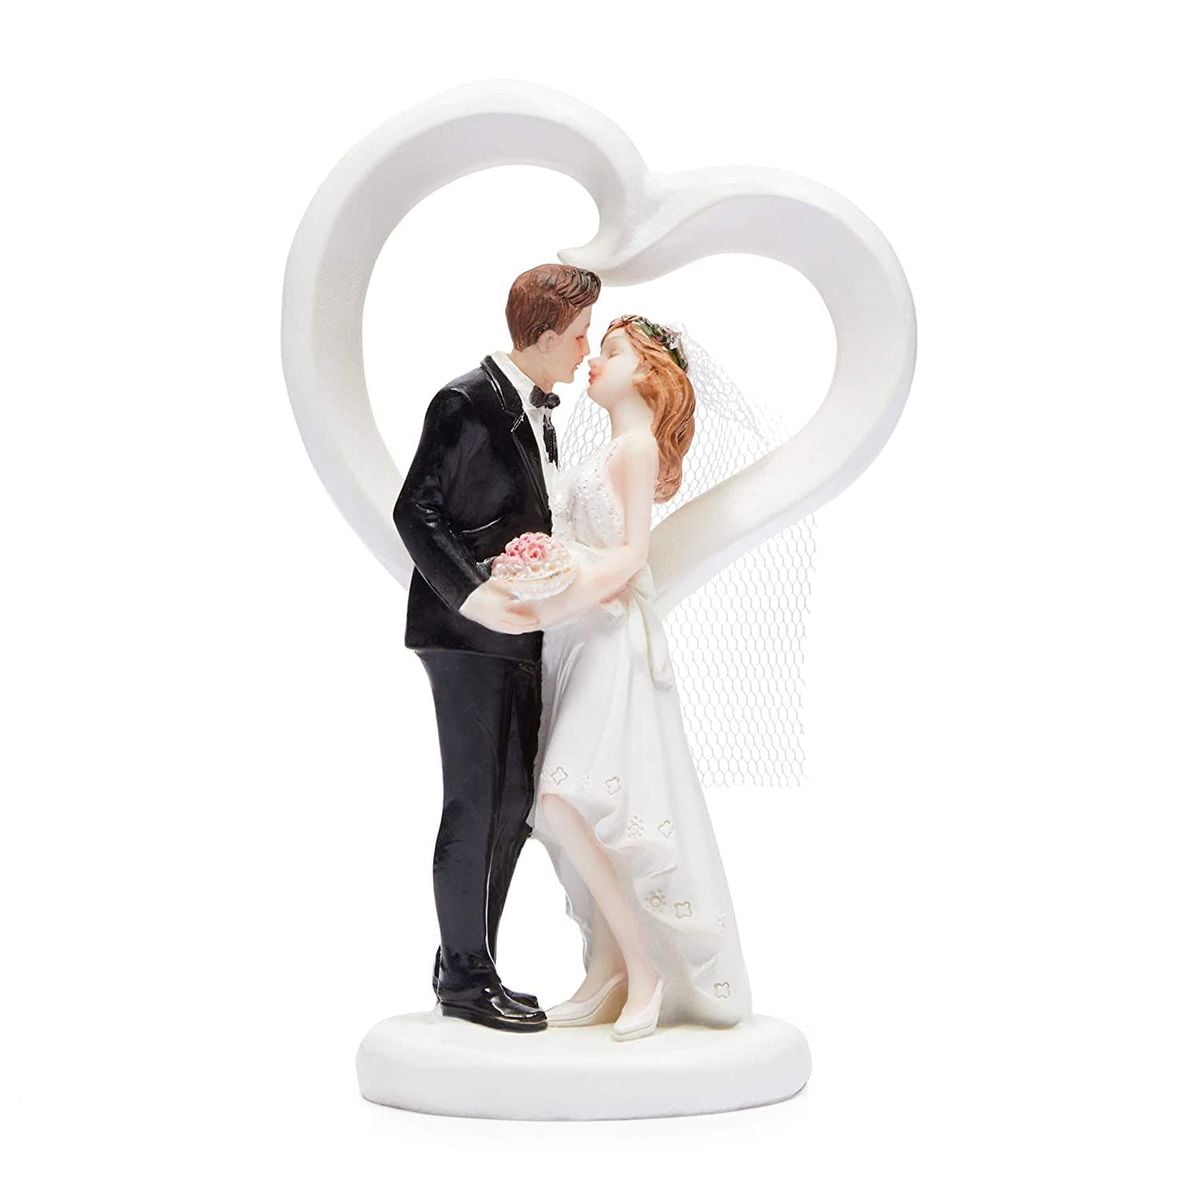 Bride and Groom Figurine cake topper  Wilton Wedding Party Decor Mr & Mrs NEW 